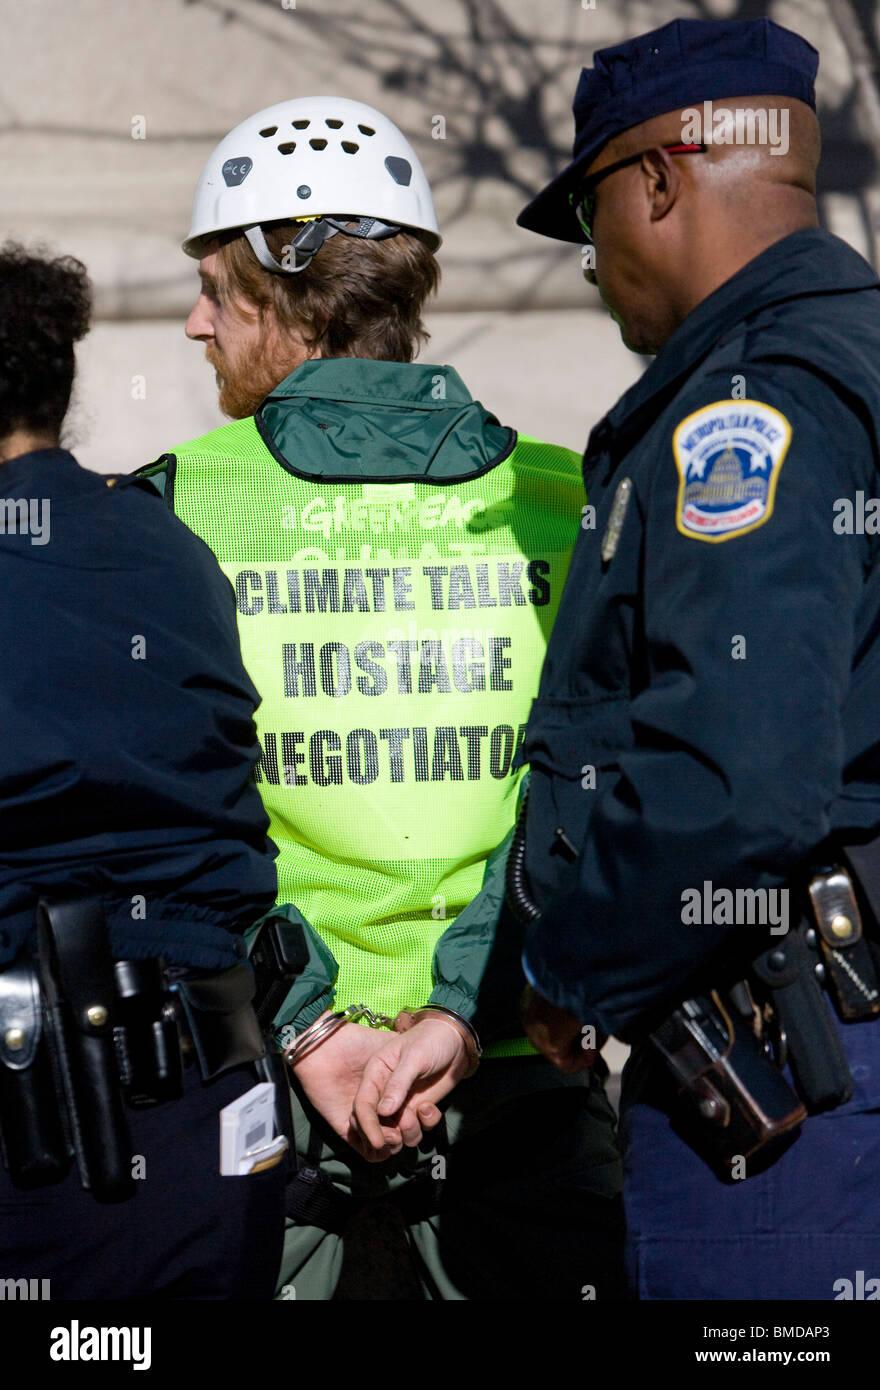 Greenpeace protesters being arrested. Stock Photo